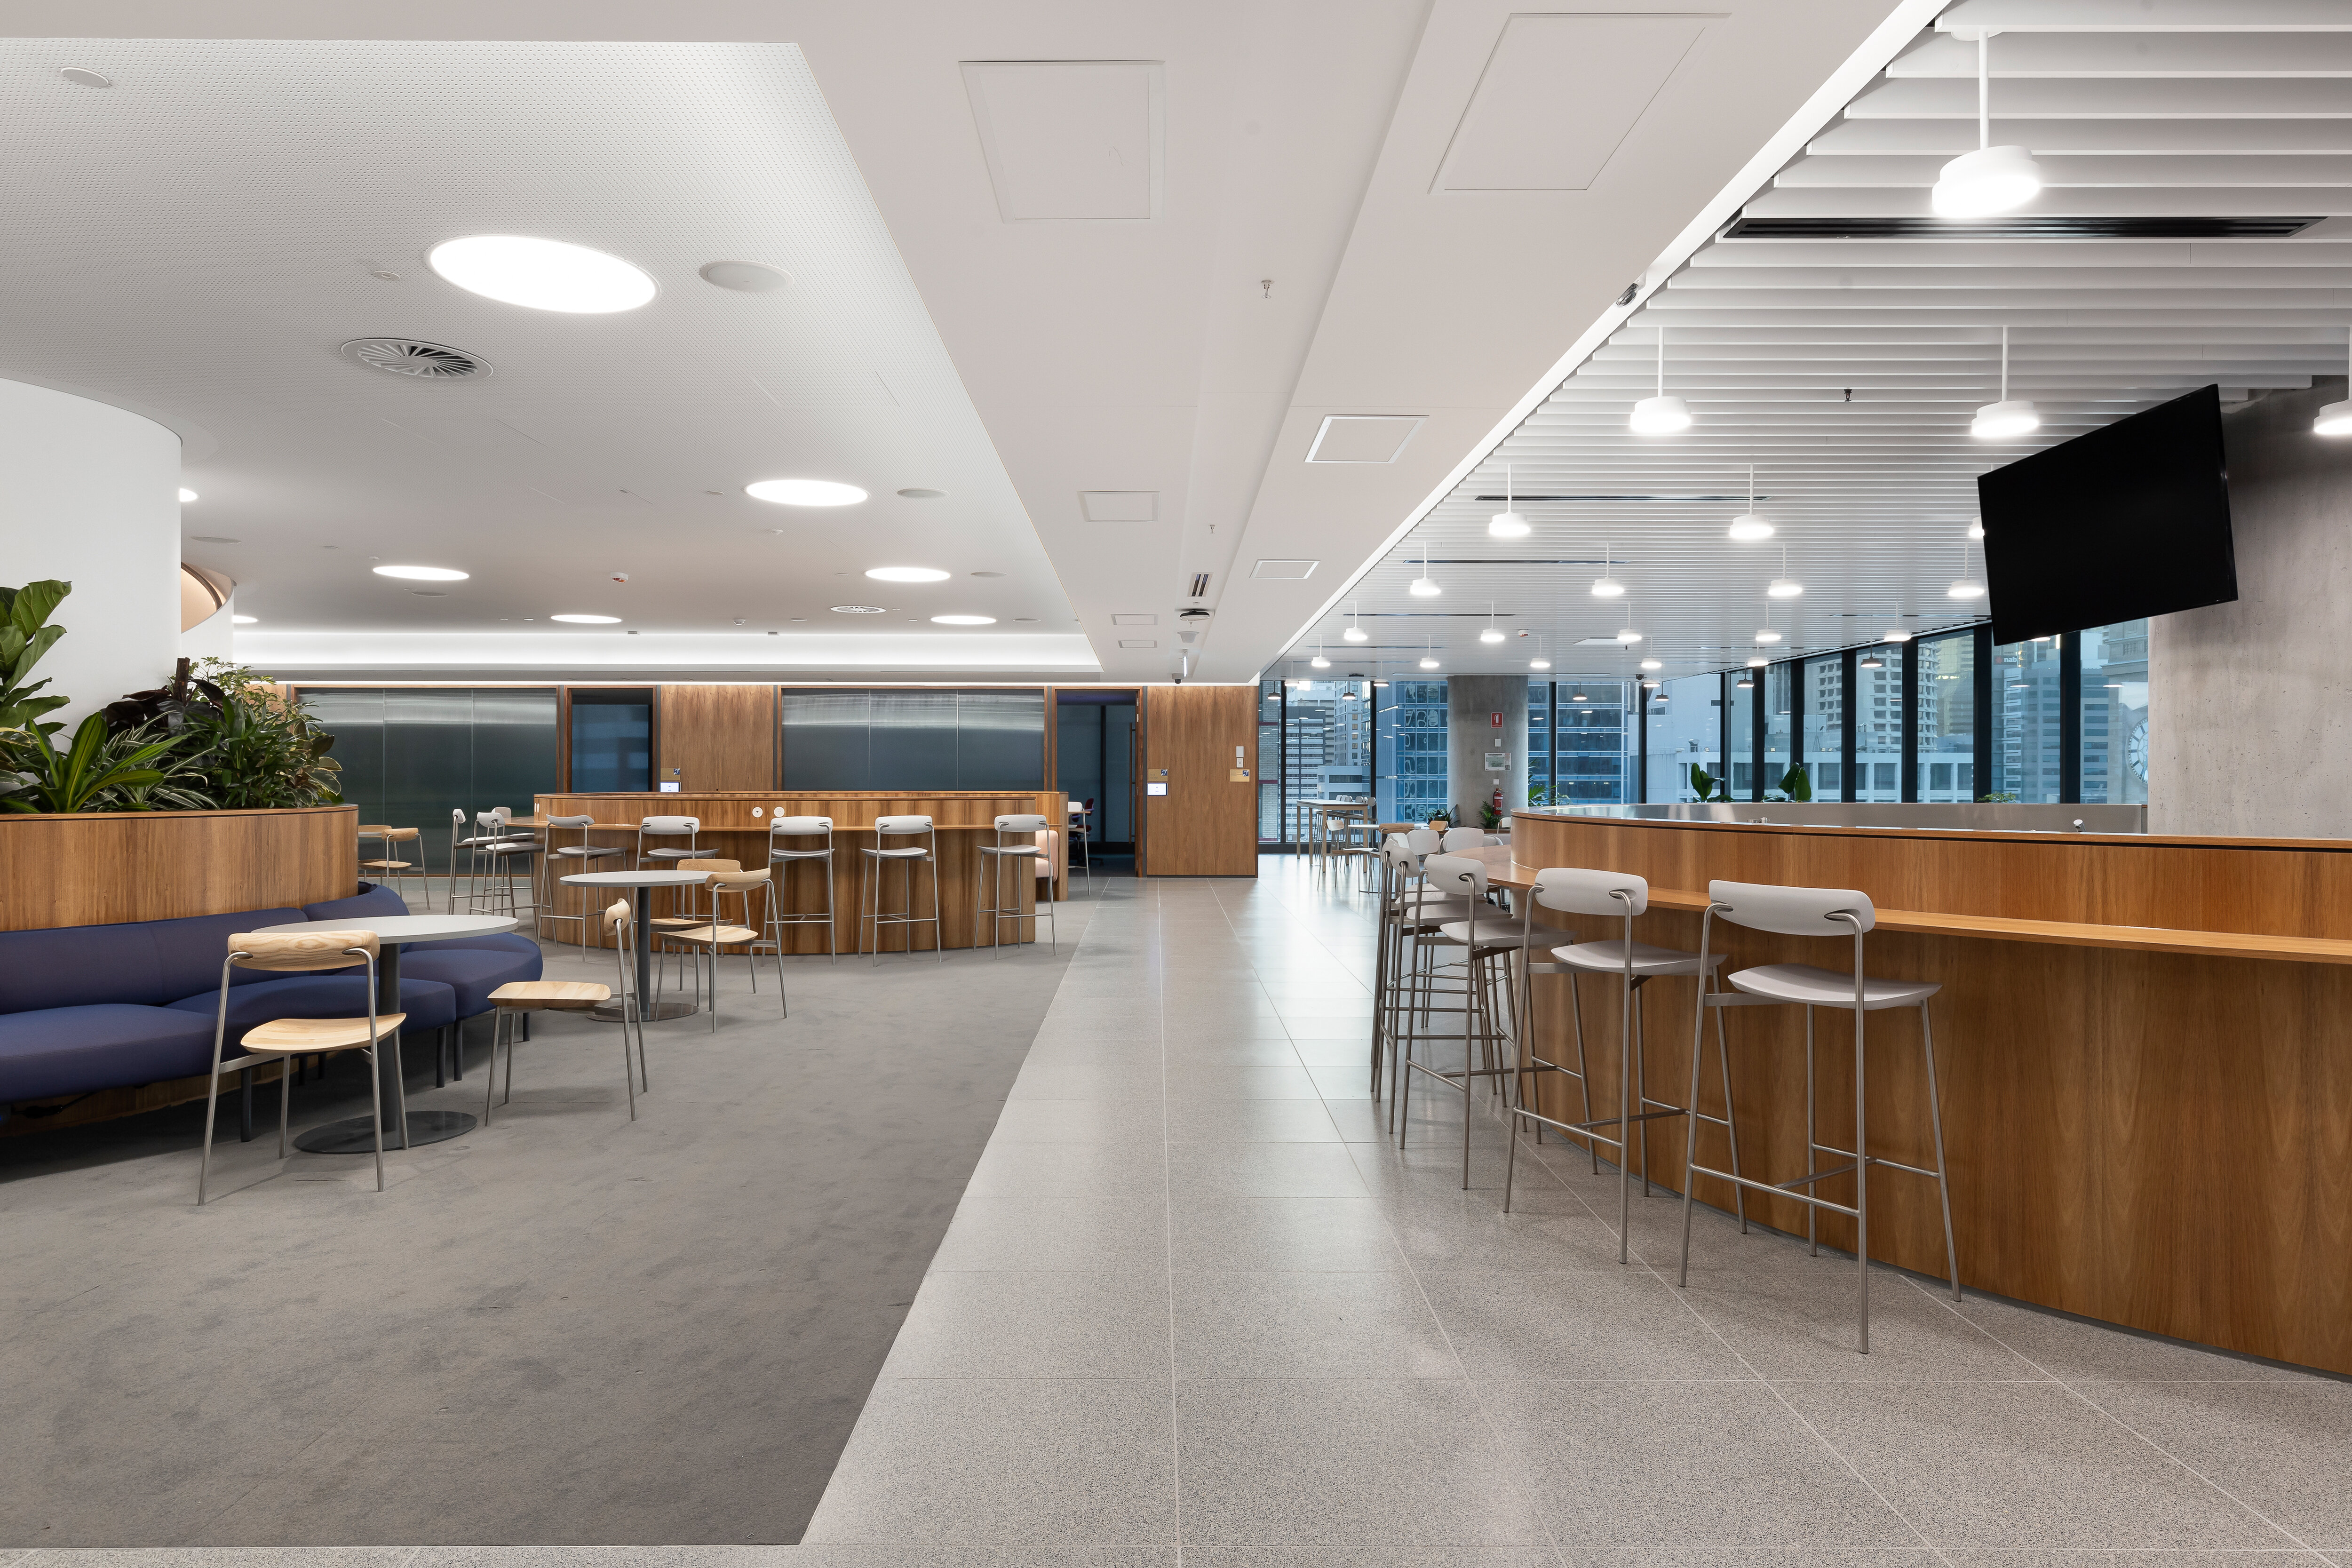 KPMG Brisbane, Architect: Cox Architecture, Engineer: Aston Consulting, Photographer: Pixel Collective